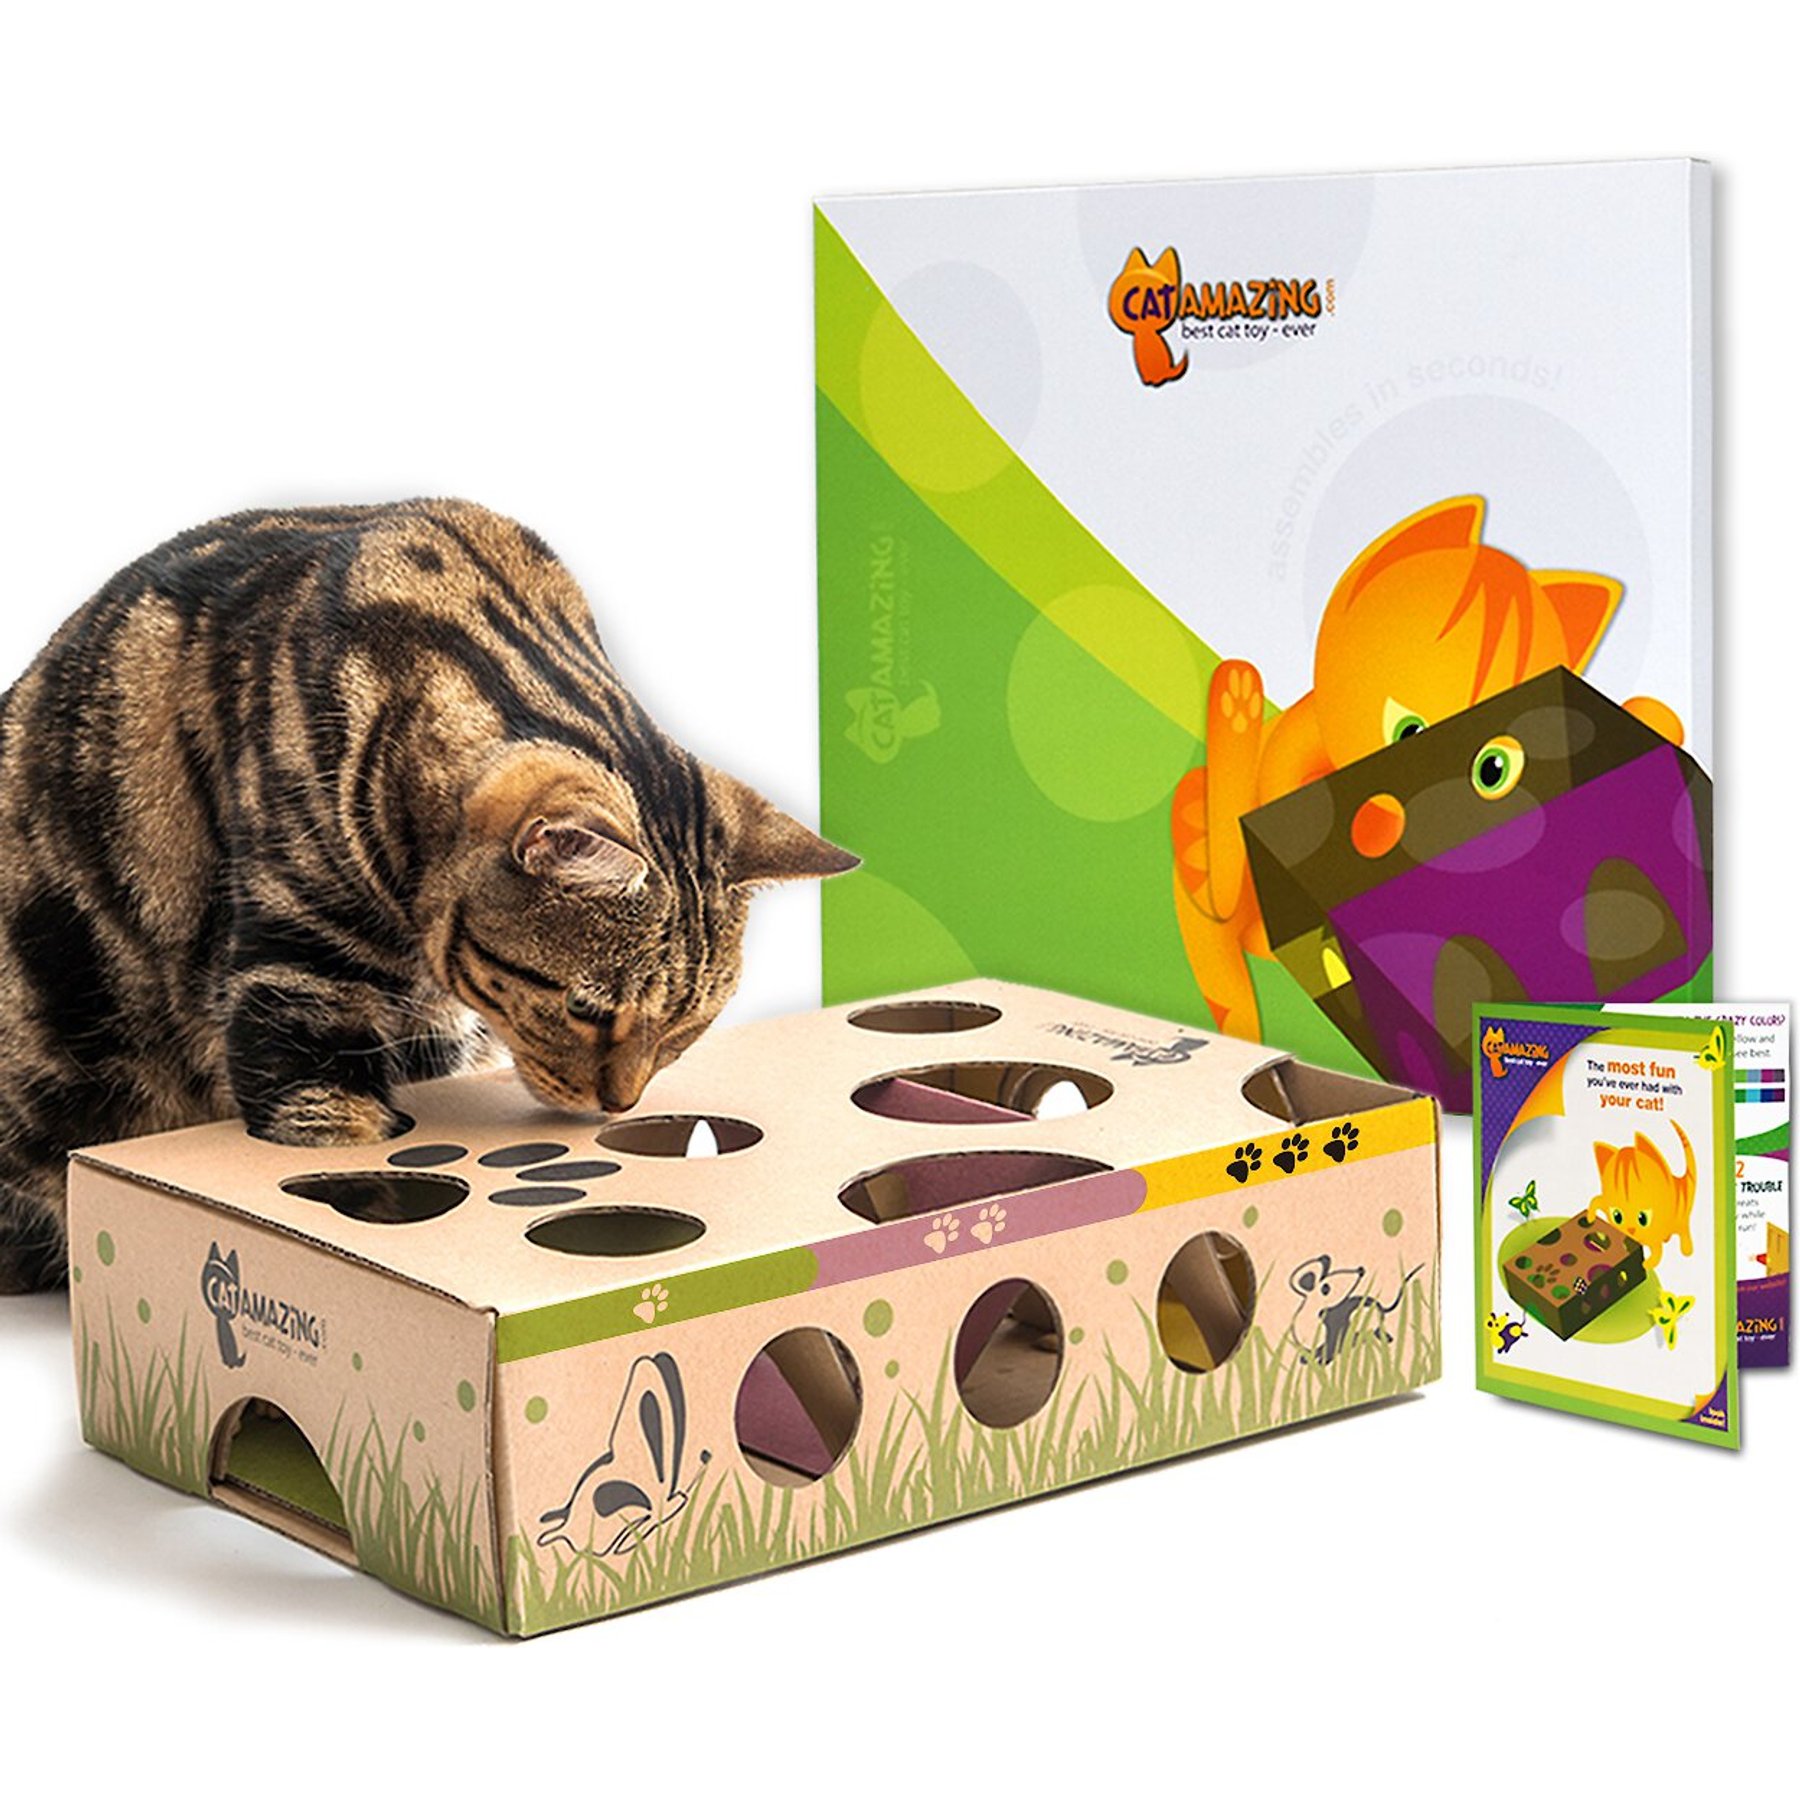 TRIXIE Flip Board Strategy Game for Cats, Puzzle Toy, Treat Dispenser,  Interactive Play, Red 